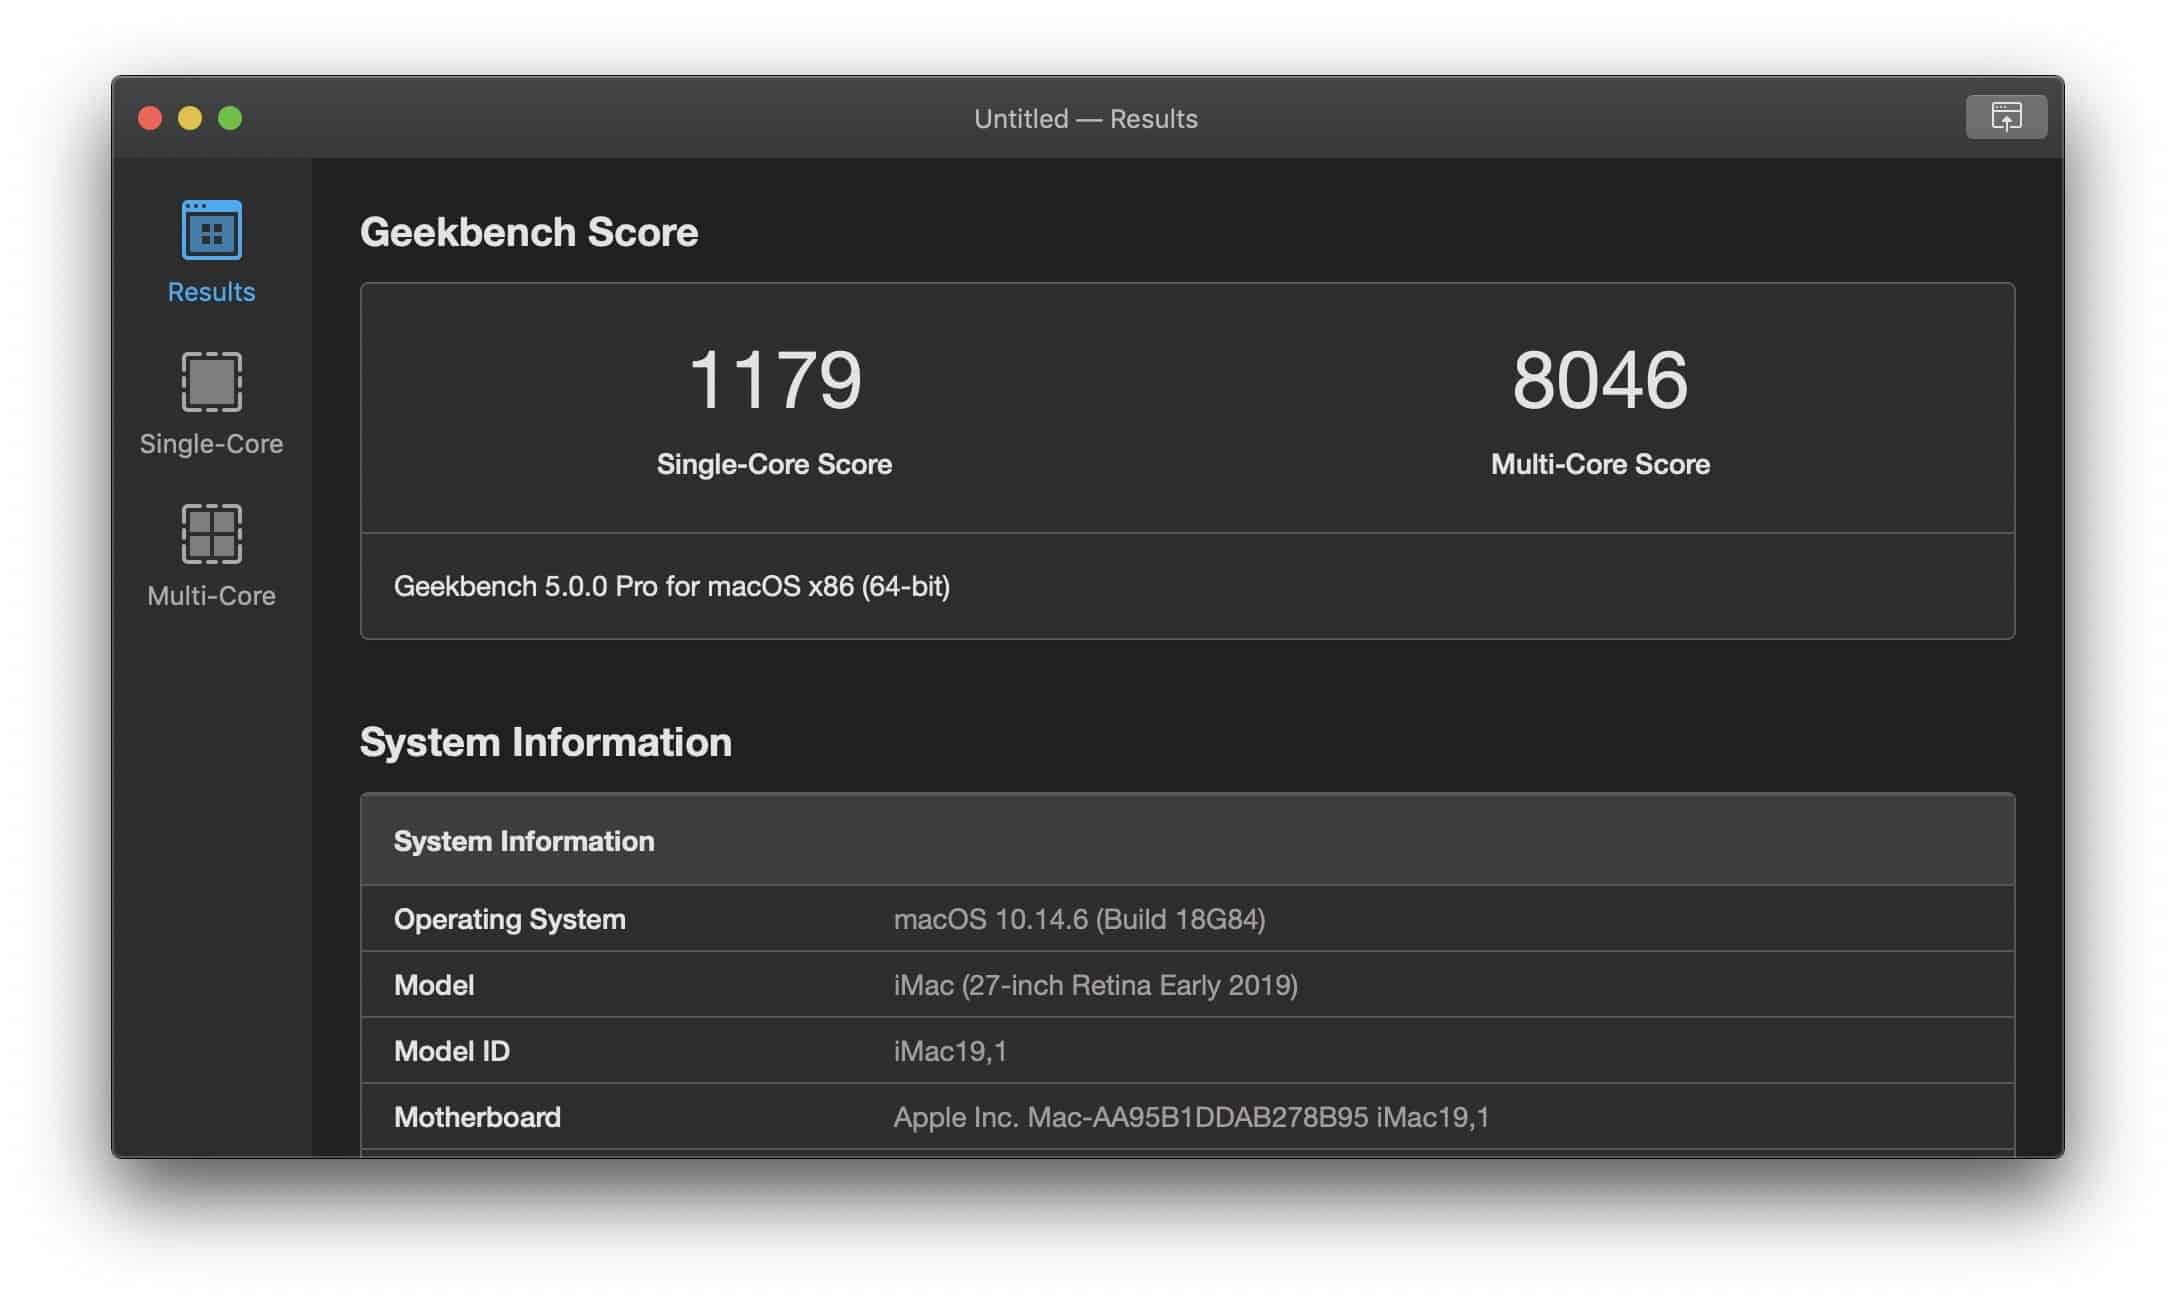 geekbench benchmarking software for PC